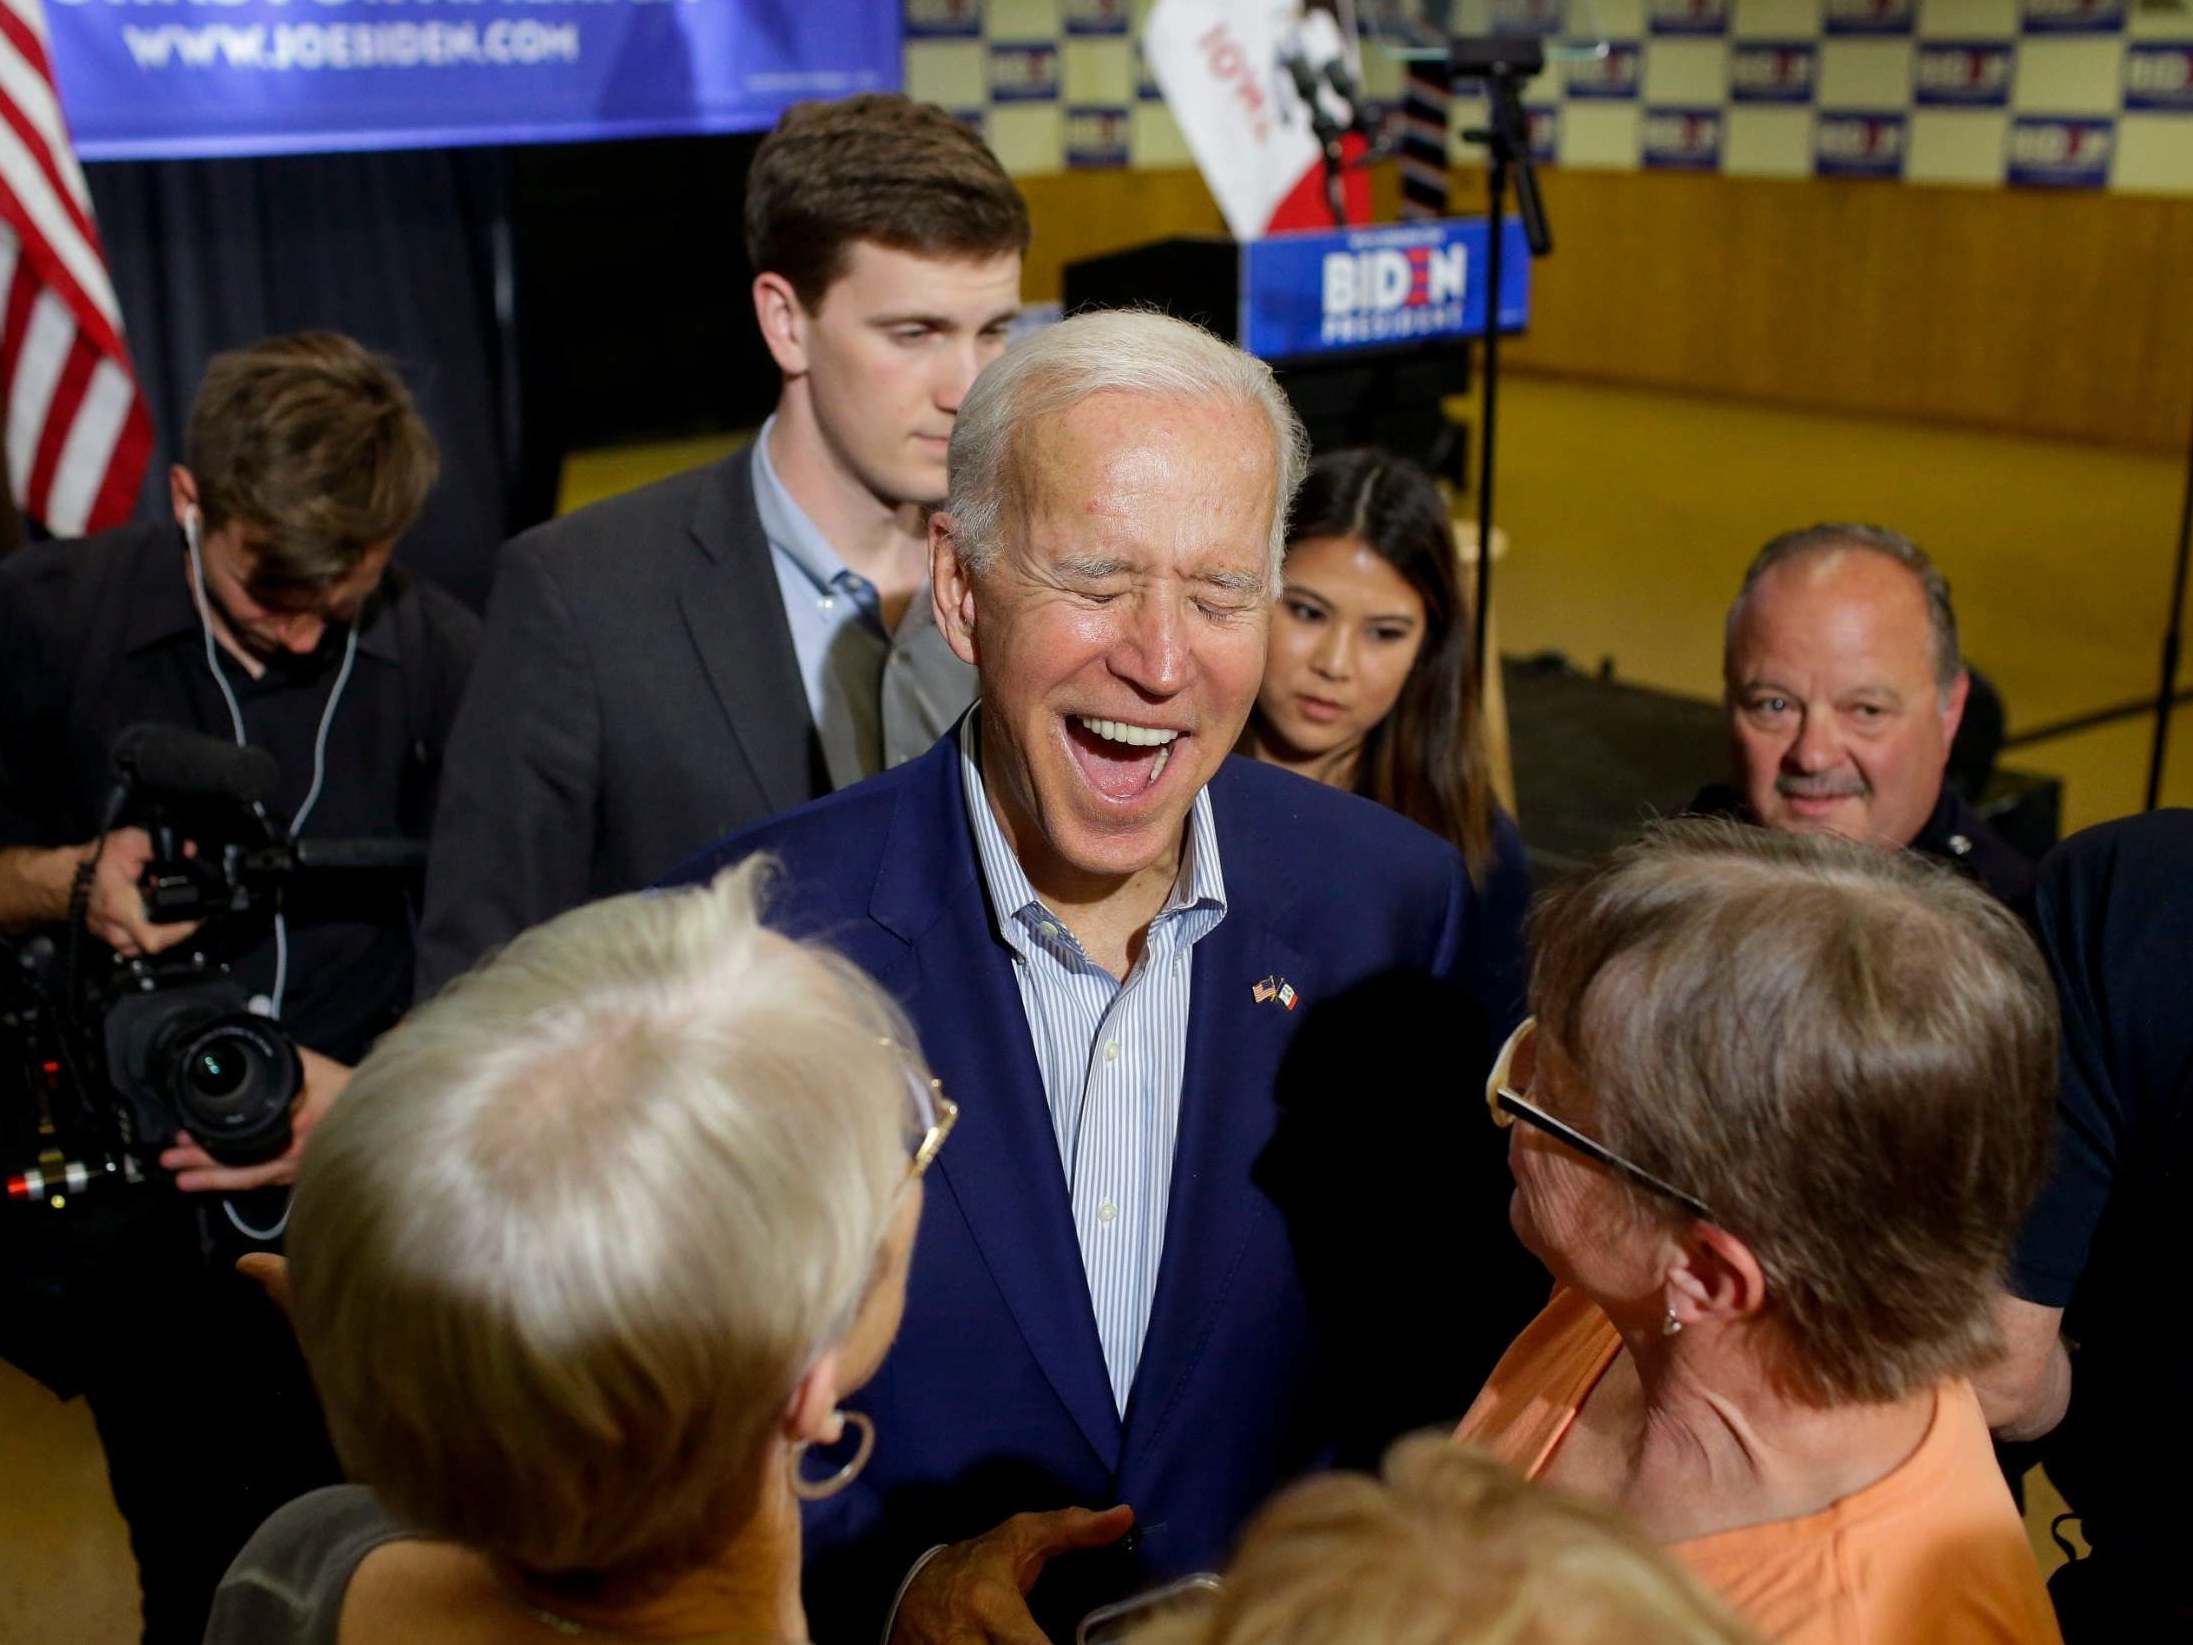 Former vice president and 2020 Democratic presidential candidate Joe Biden laughs as greets attendees during a campaign event on 11 June 2019 in Davenport, Iowa.